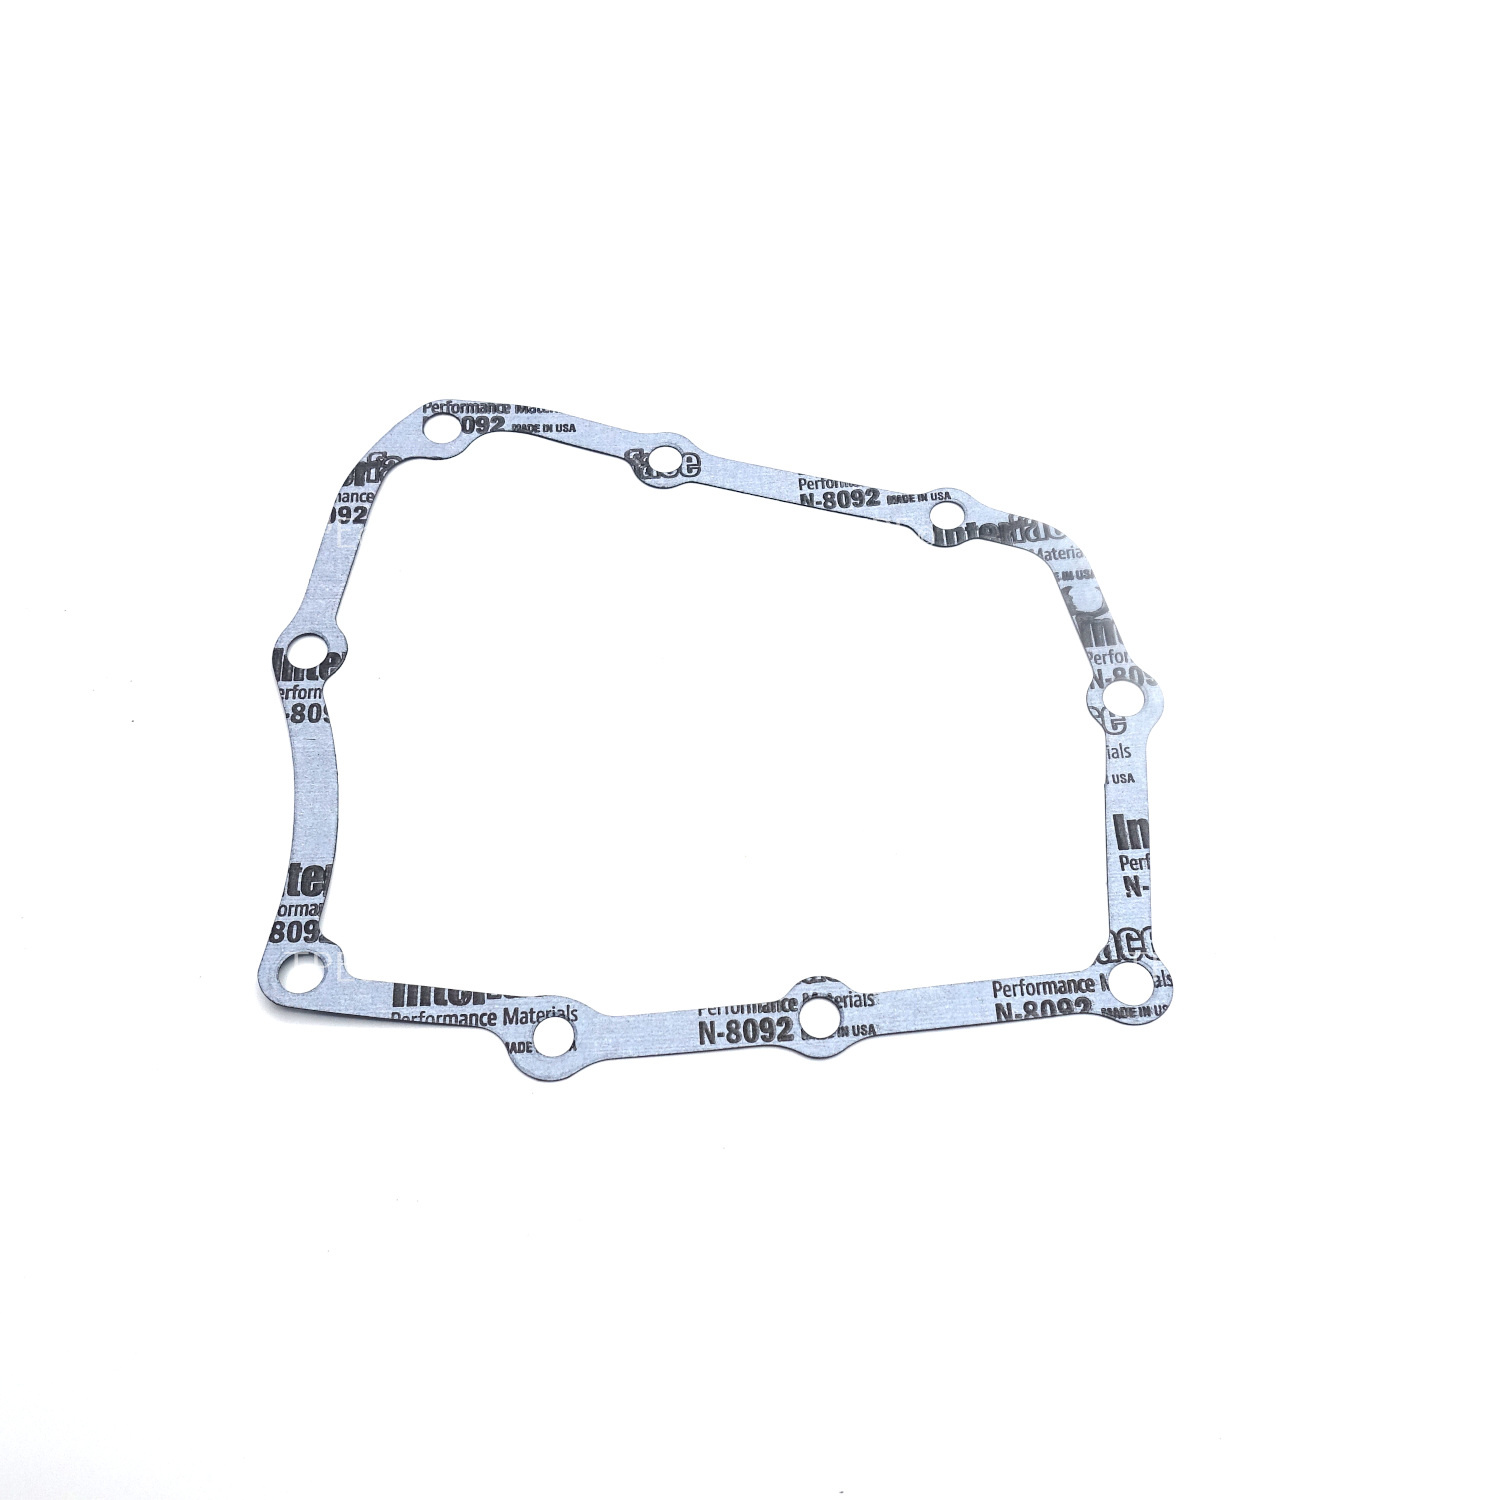 OP.GK.04 F10,F13,F15,F17 5th End Cover Gasket